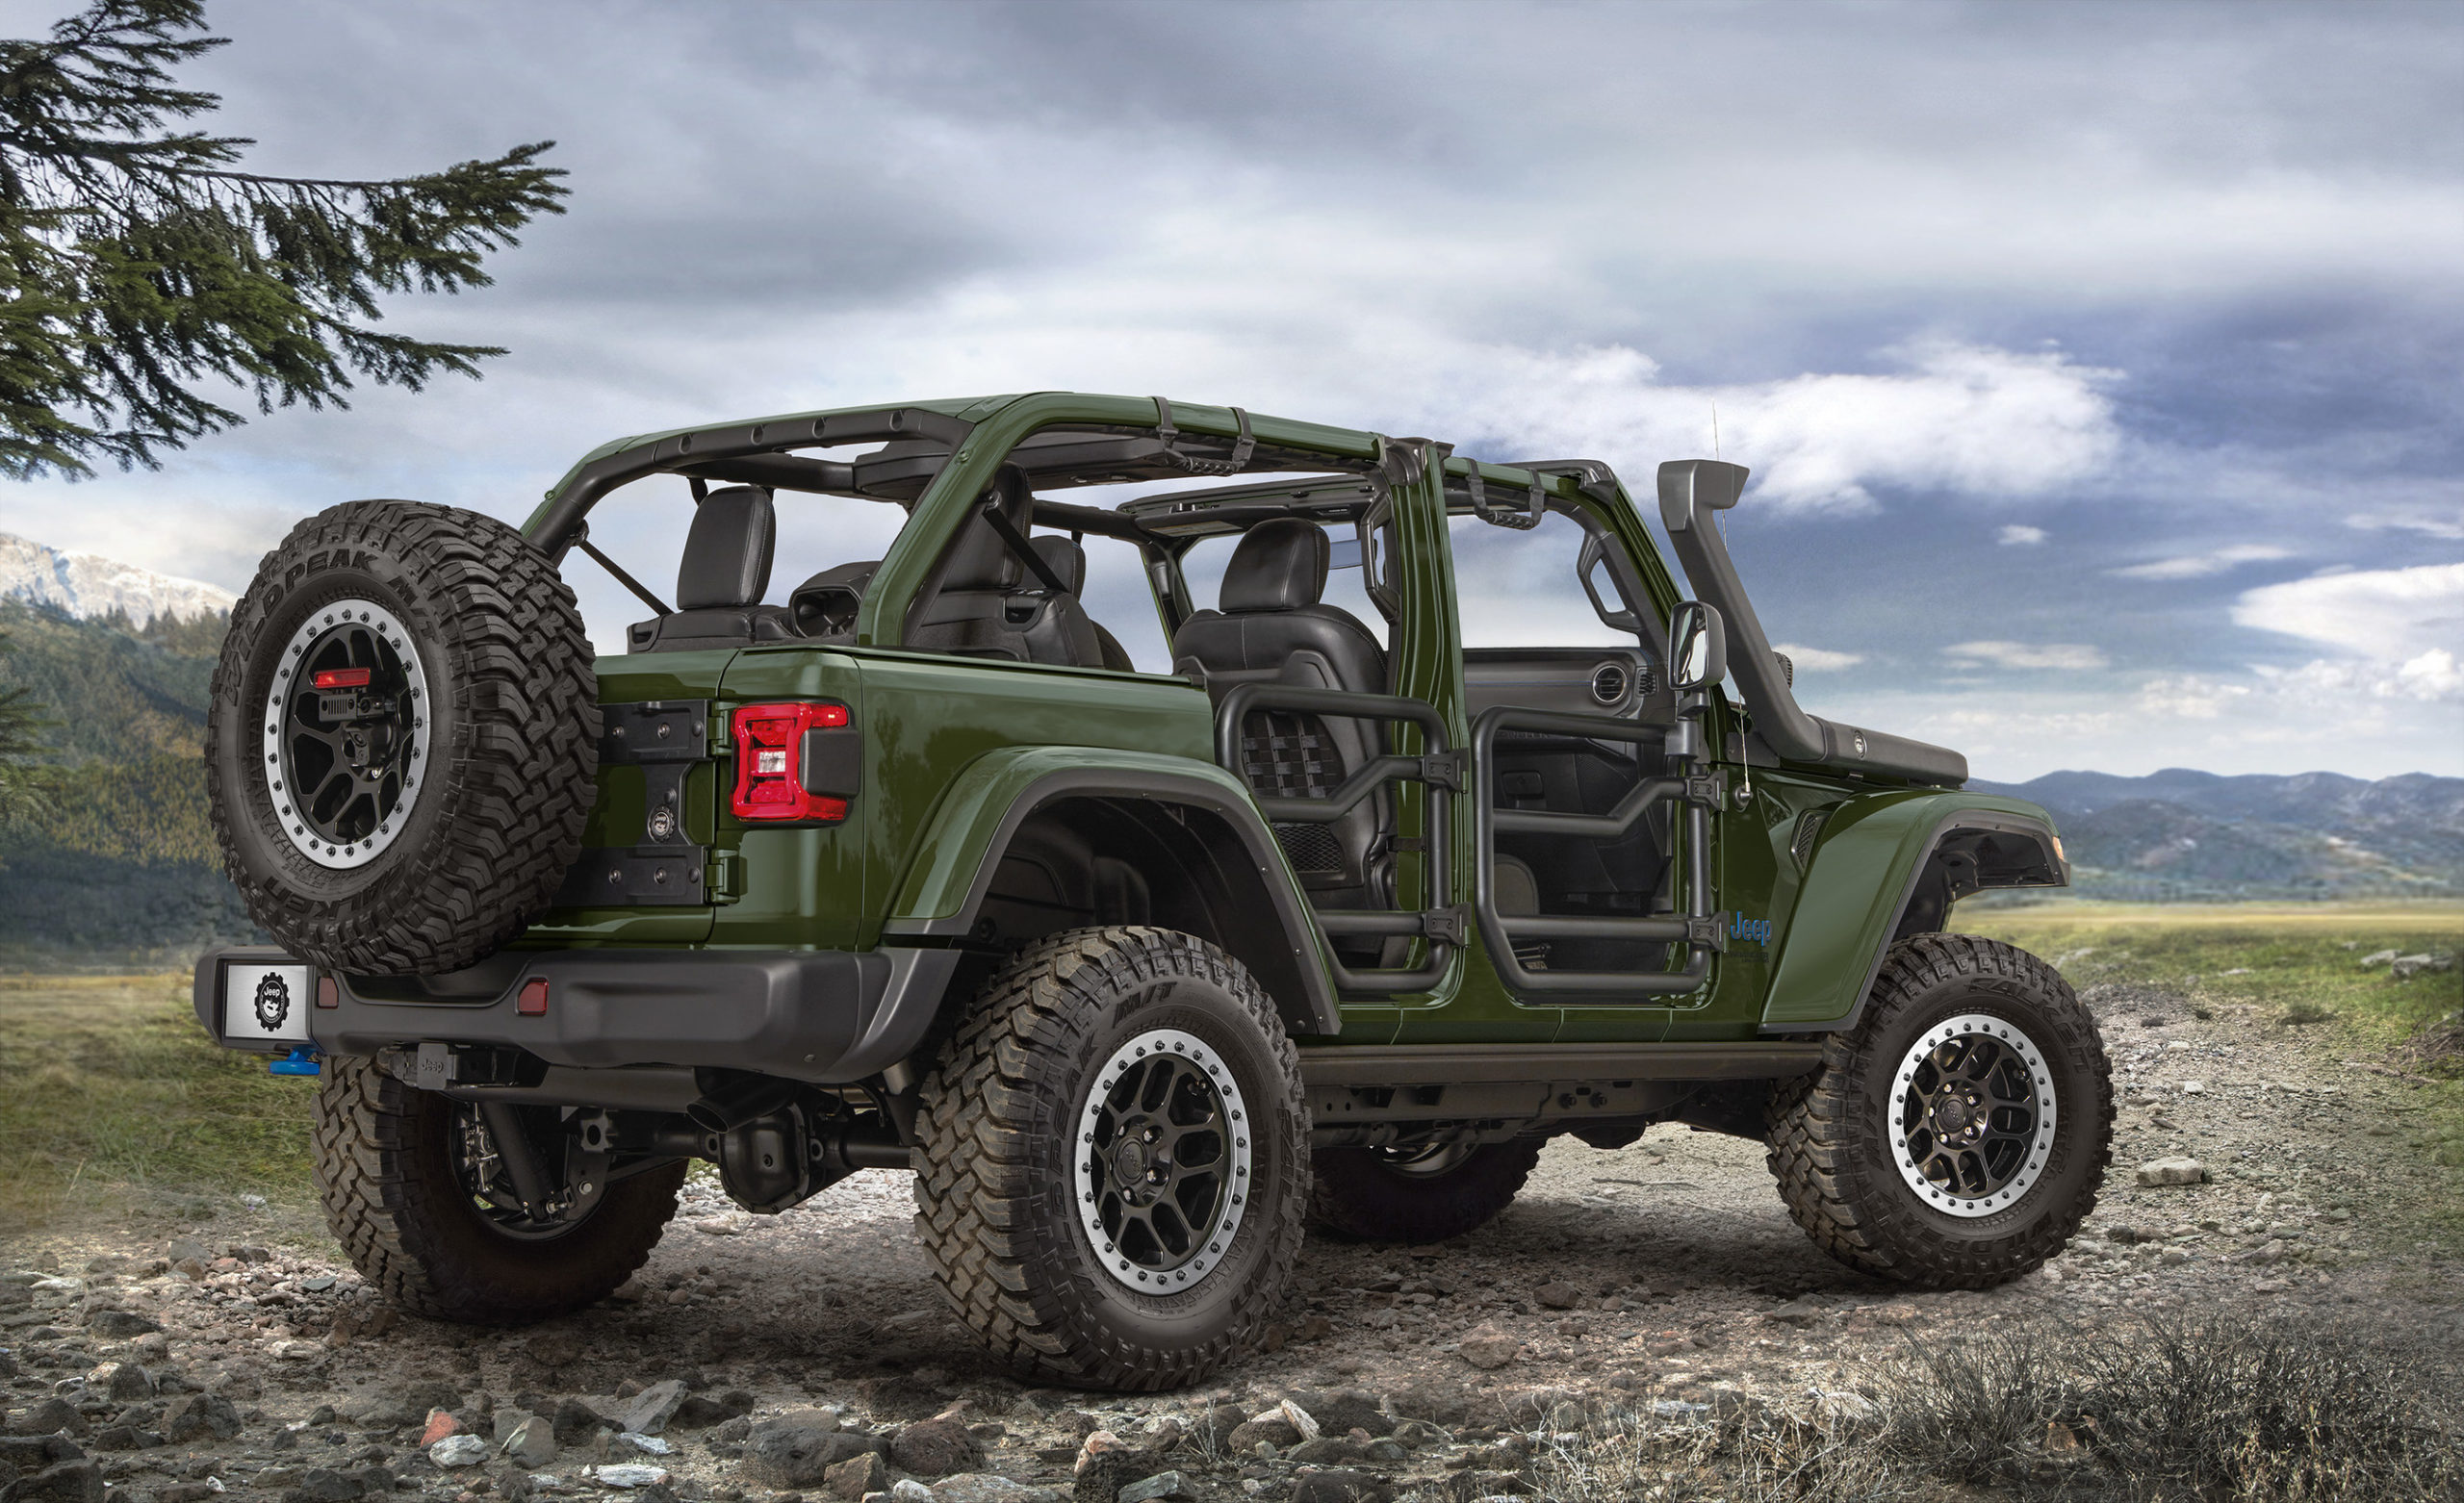 Jeep Performance Parts Introduces Lift Kit for Plug-In Hybrid Wrangler | THE SHOP